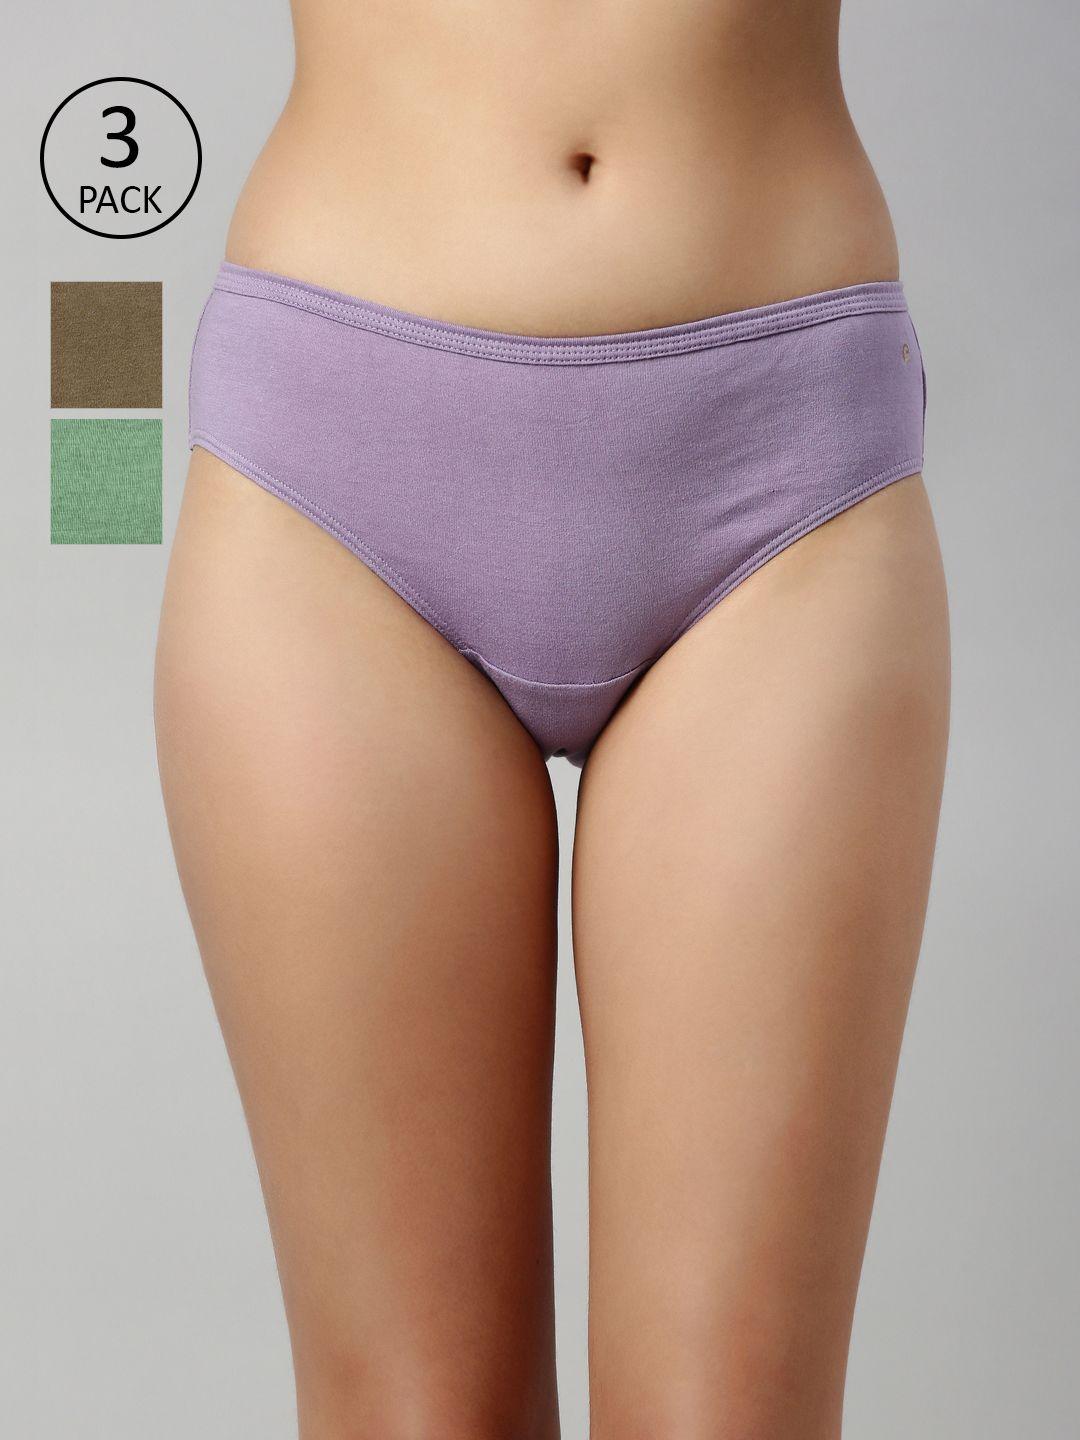 enamor-women-pack-of-3-solid-cotton-antimicrobial-hipster-briefs-ch03